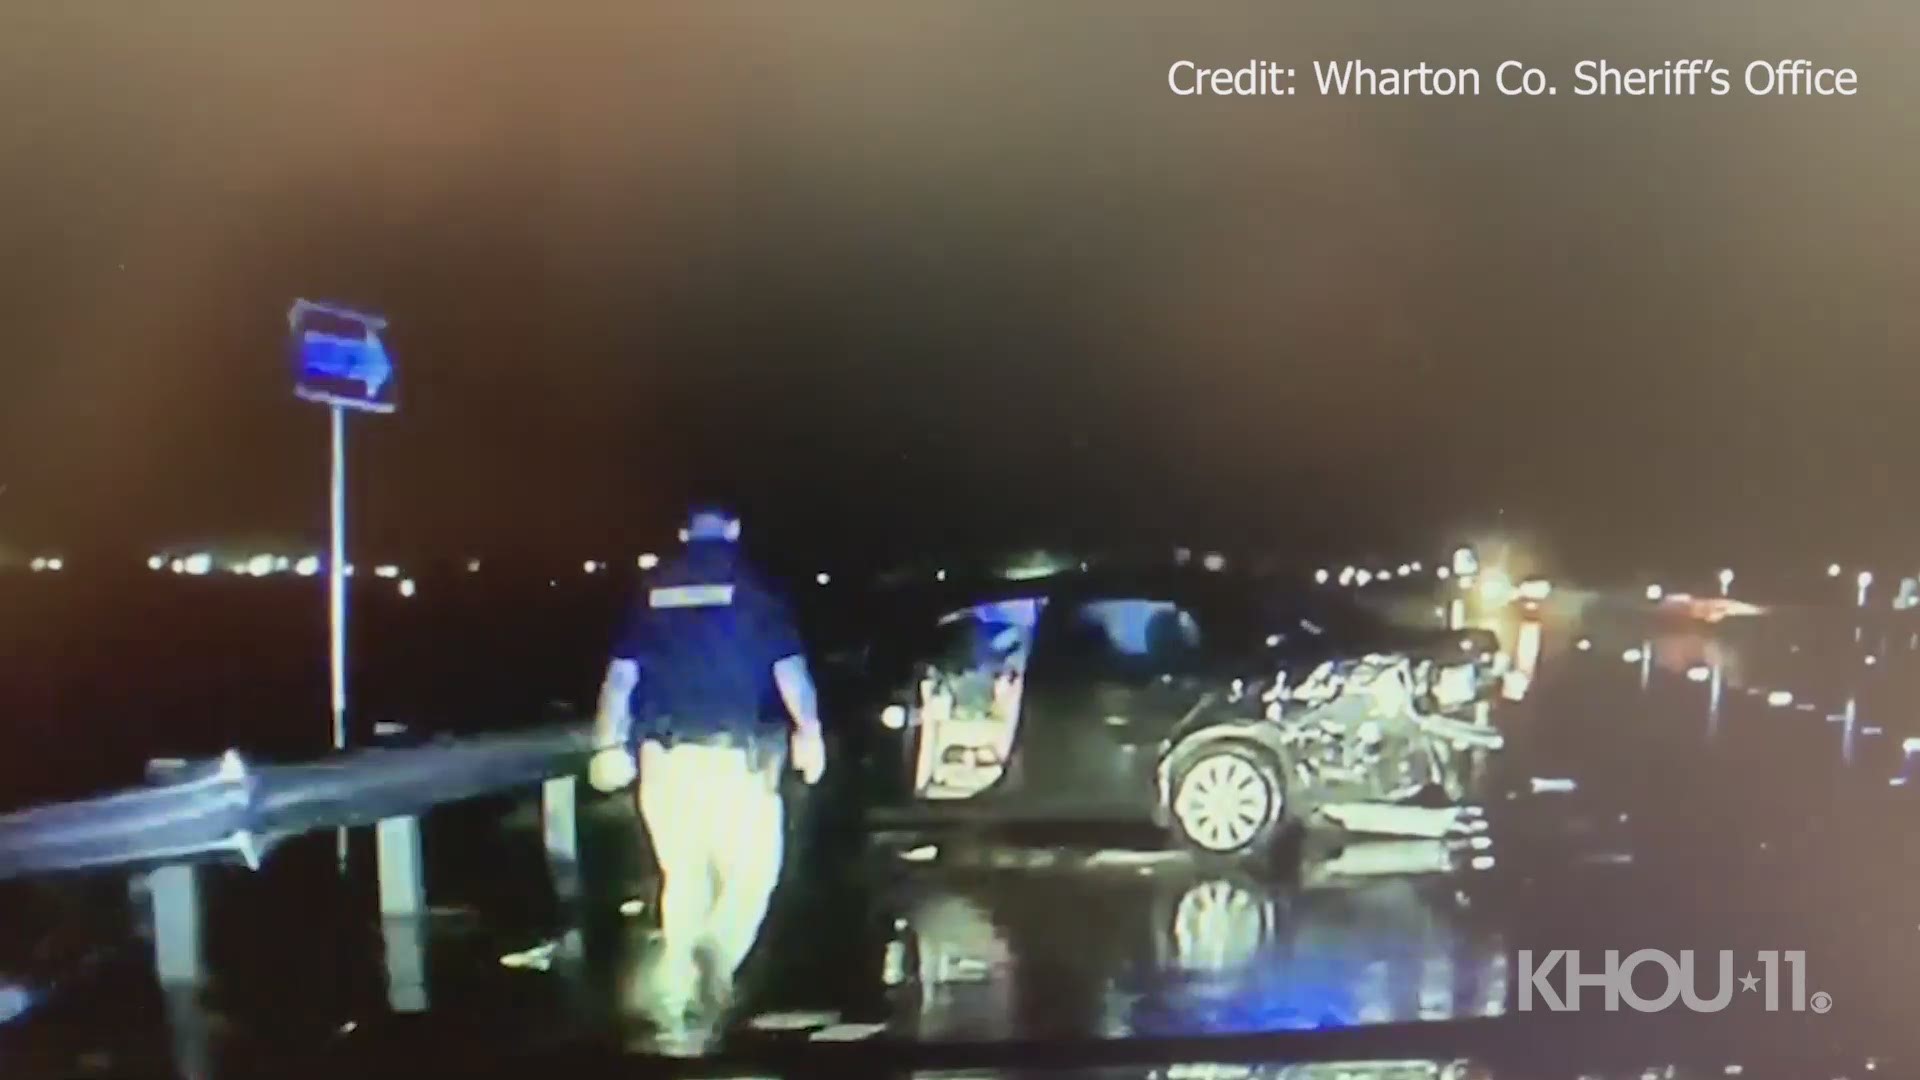 The Wharton County Sheriff’s Office has released video of an accident they hope will serve as a reminder for drivers.